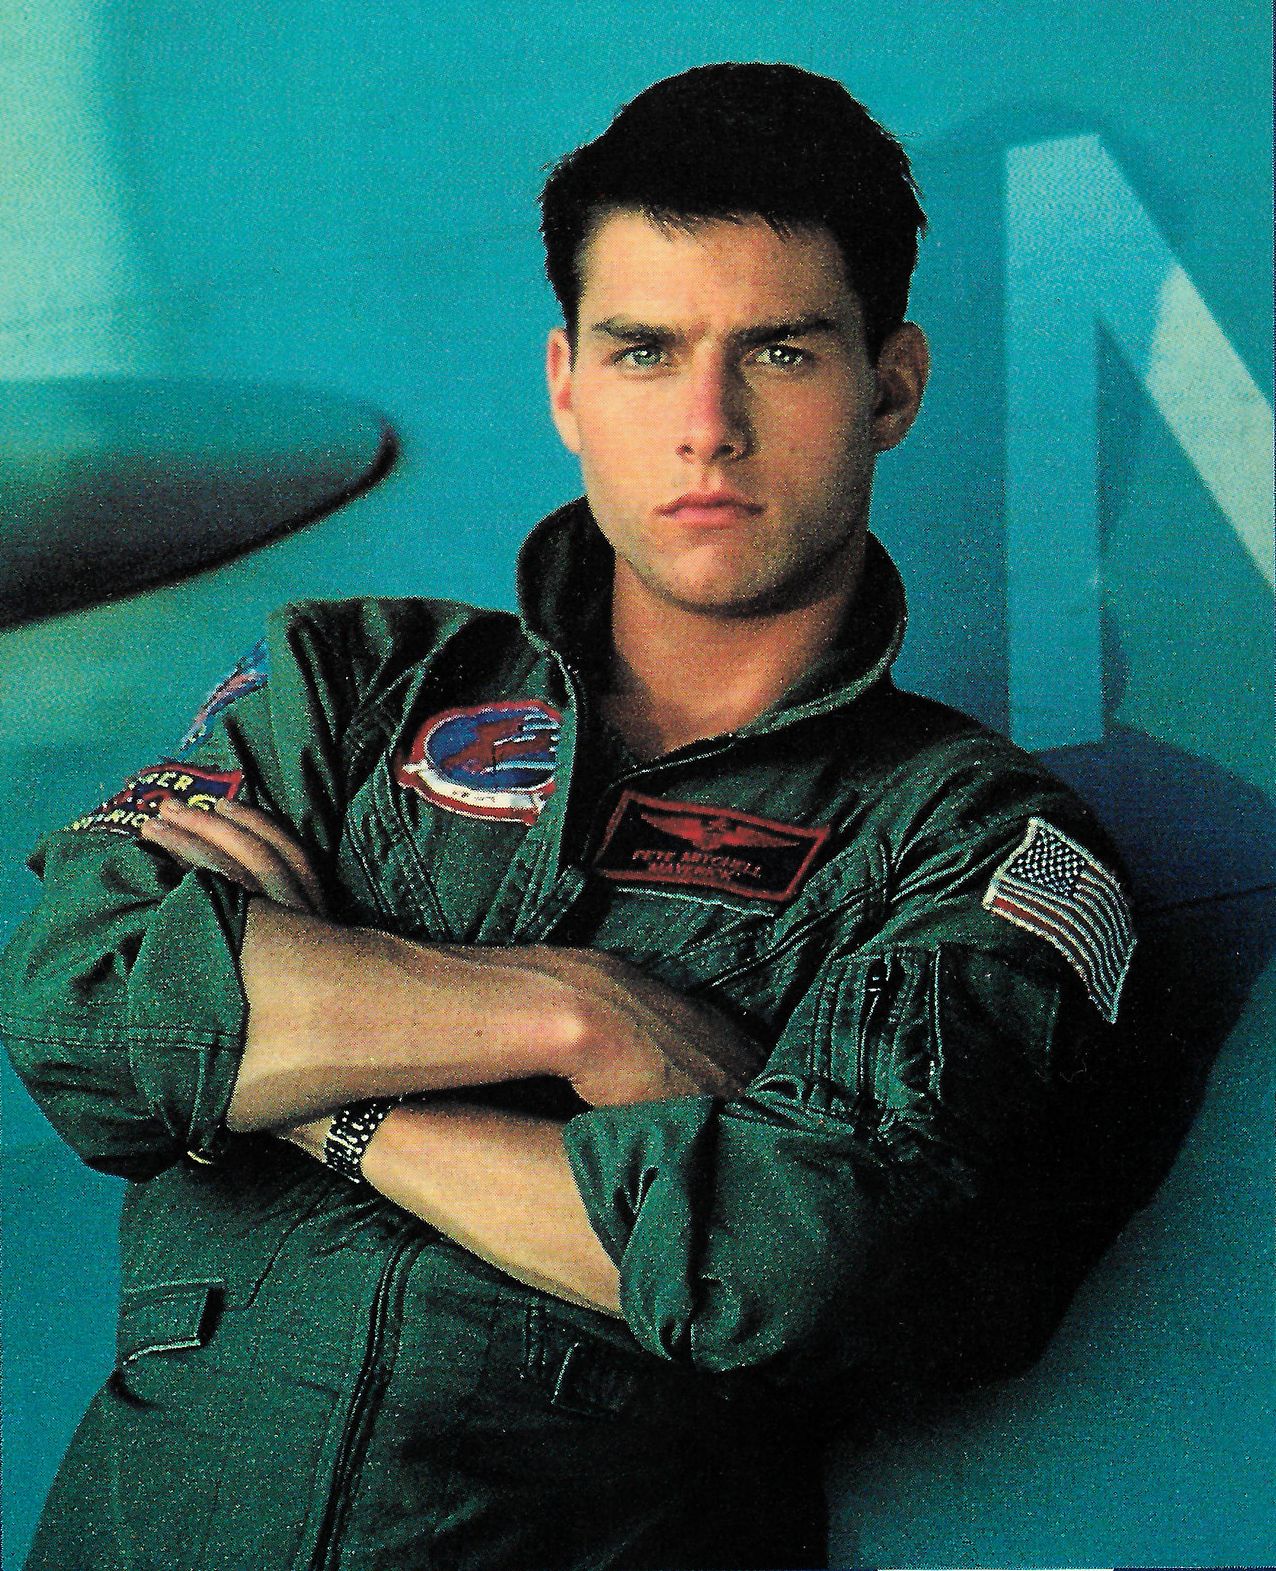 Top Gun' is the gayest movie ever made | by Jonathan Poletti |  𝐐𝐮𝐞𝐞𝐫𝐓𝐡𝐞𝐨𝐫𝐲 | Medium